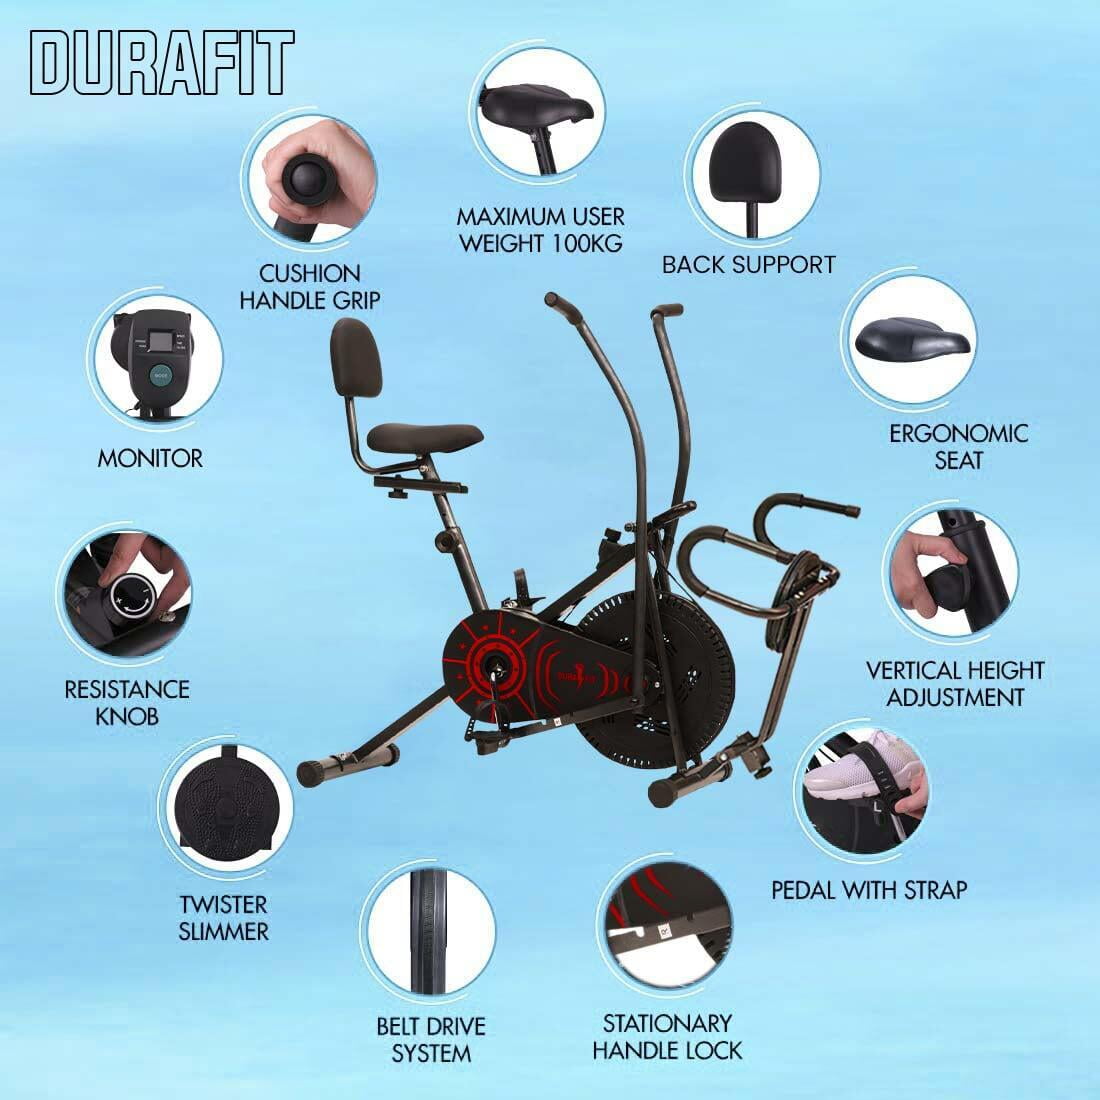 Durafit Air bike ABRT2 with Multiple Features